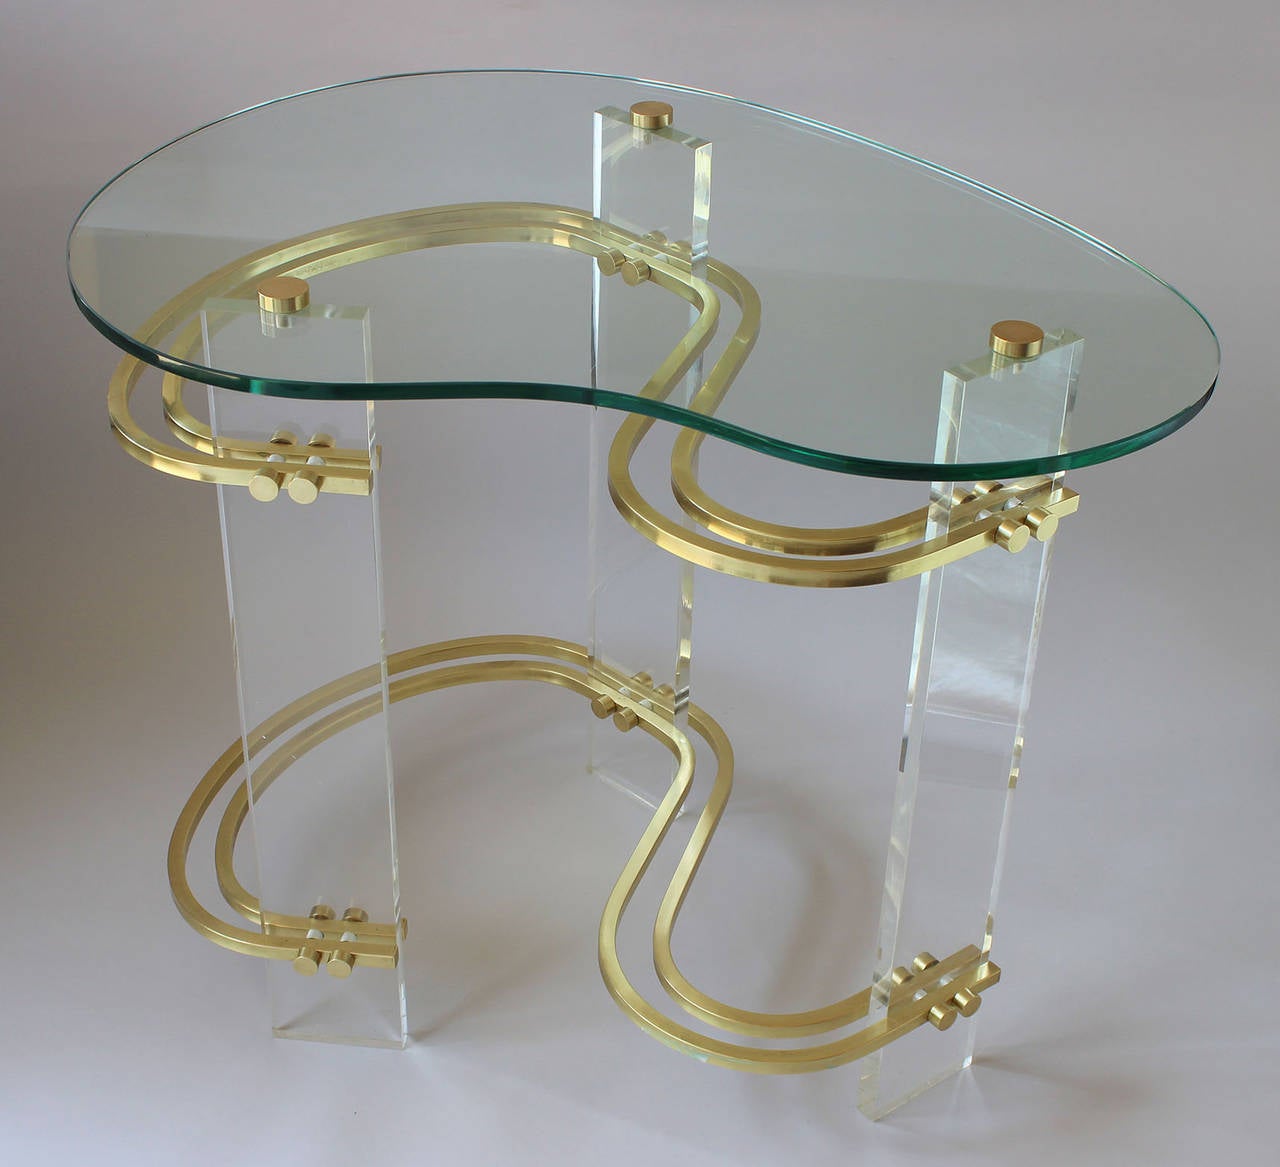 A Magnificent pair of lucite, brass and glass end tables designed by Charles Hollis Jones (b 1945), who founded CHJ Designs in Los Angeles at the age of 16, and received commissions from Frank Sinatra, Lucille Ball and Johnny Carson, among others.